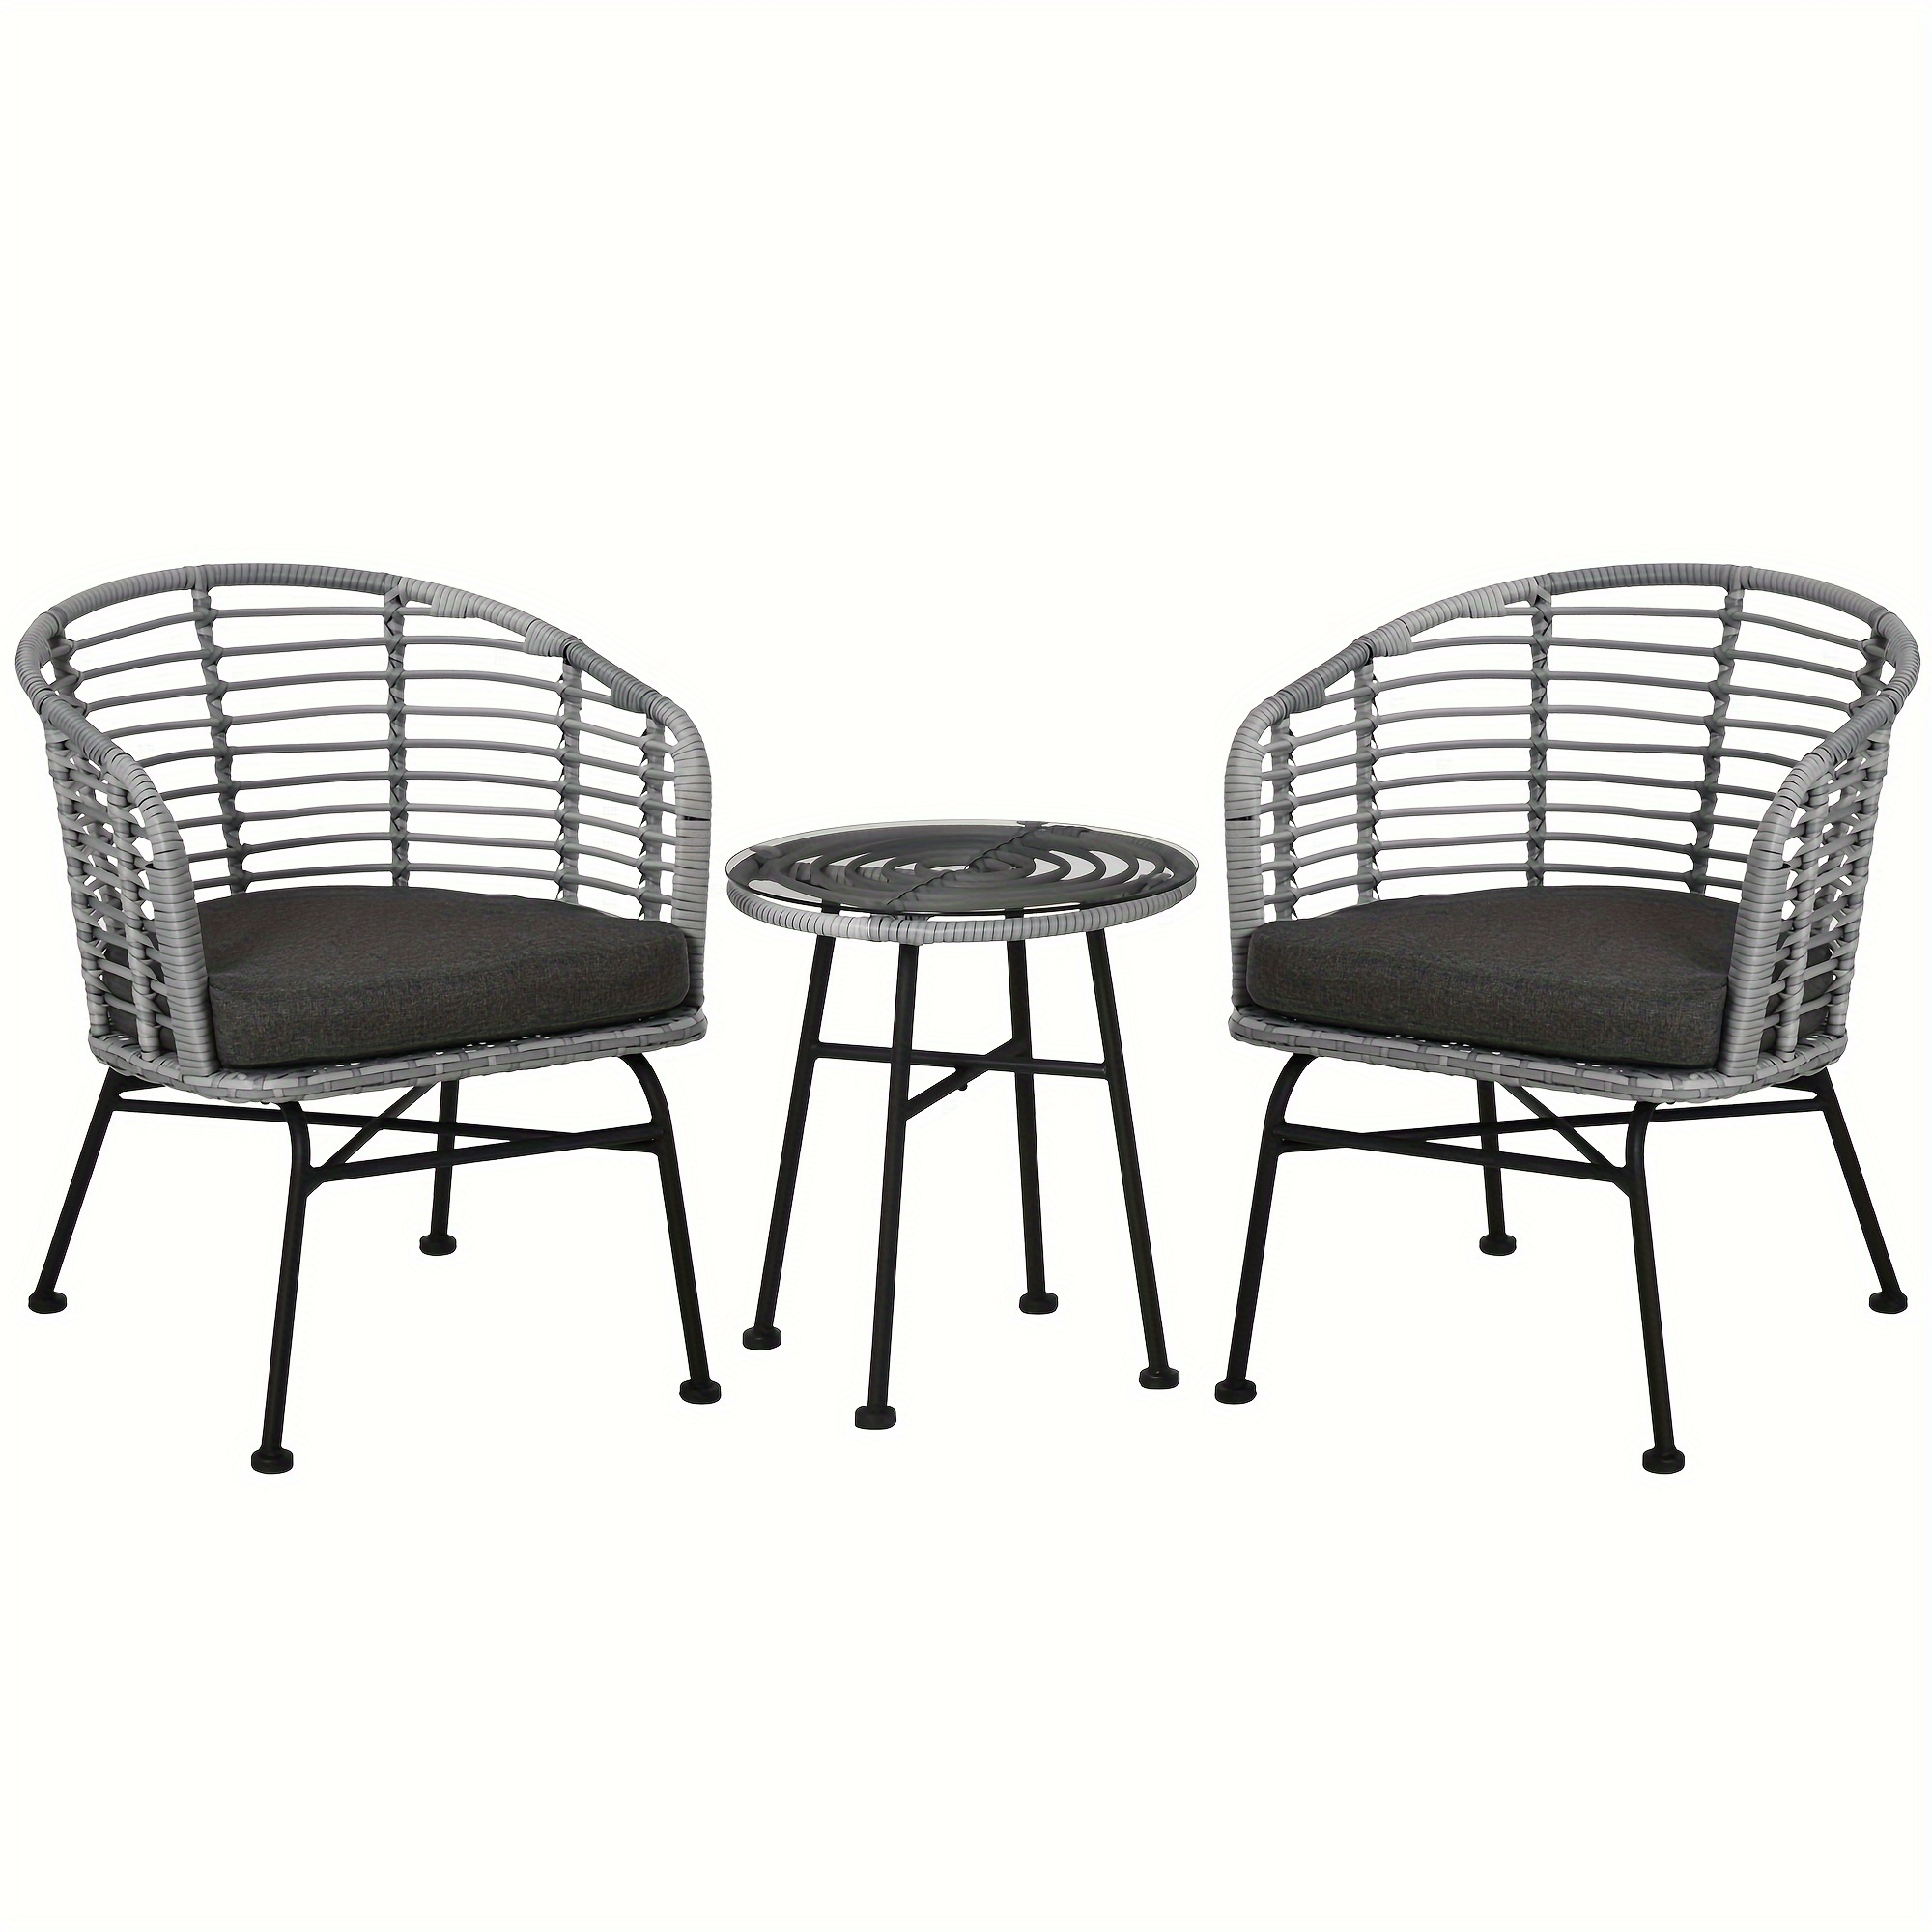 

3 Piece Patio Bistro Set, Pe Rattan Outdoor Furniture With Cushioned Barrel Chairs & Glass Coffee Table, Conversation Set For Porch, Backyard, Apartment, Balcony, Mixed Gray